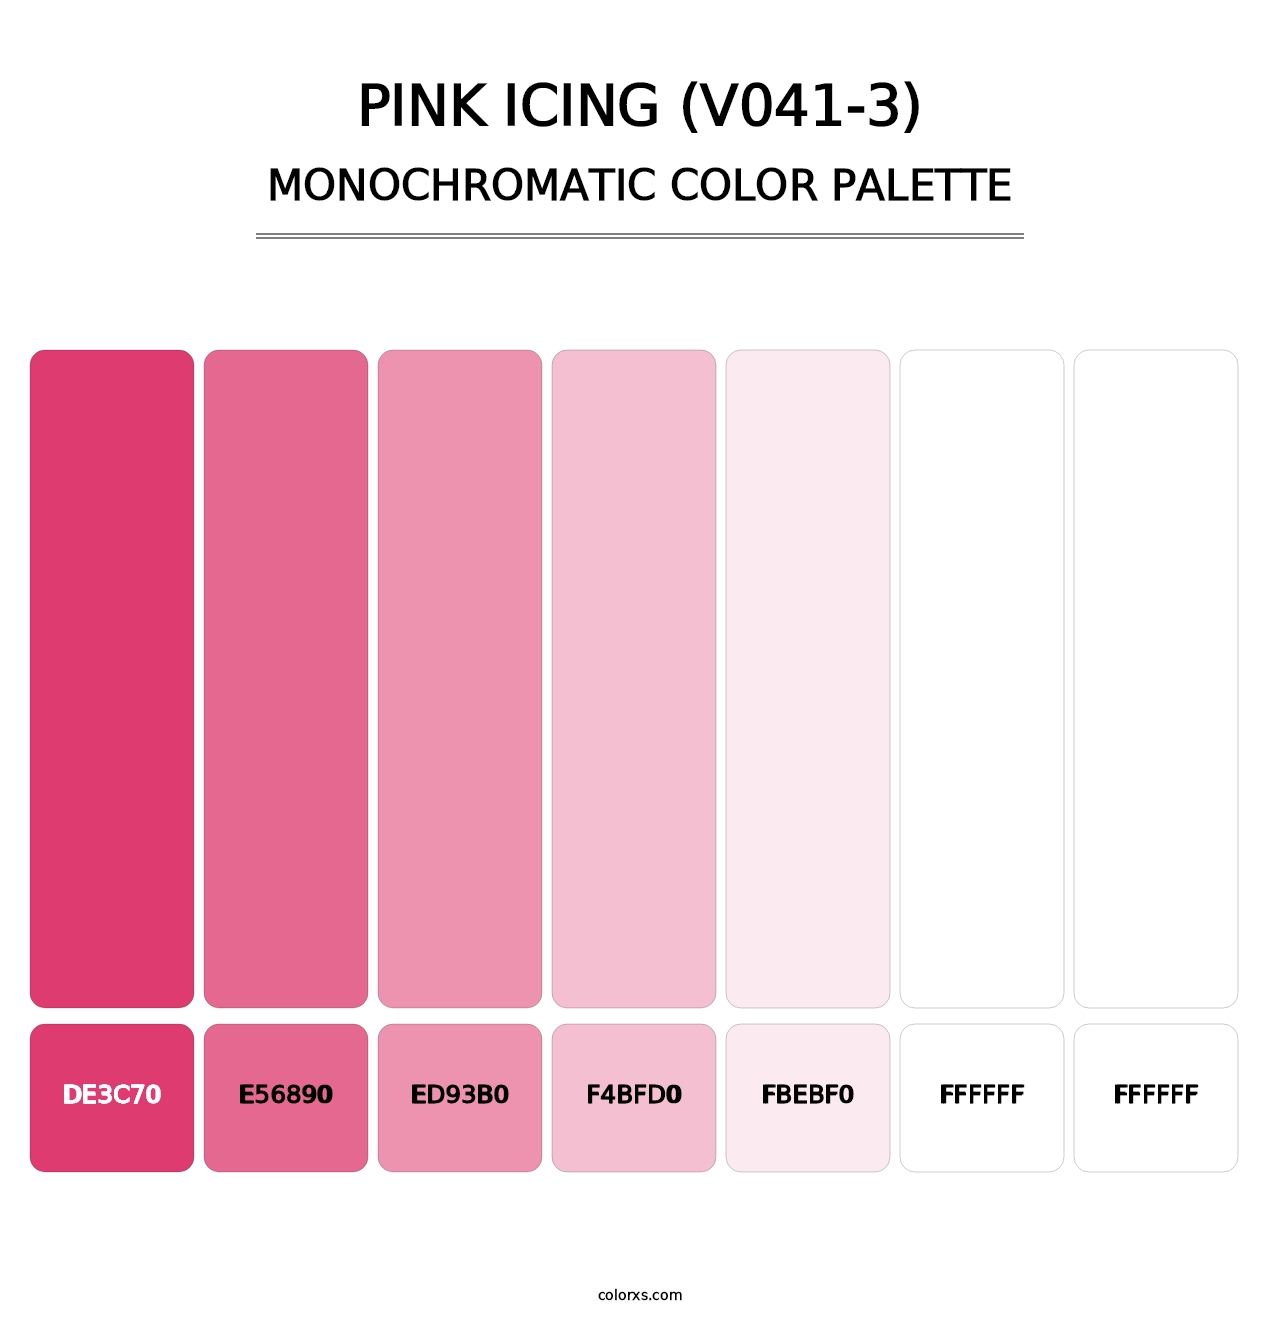 Pink Icing (V041-3) - Monochromatic Color Palette